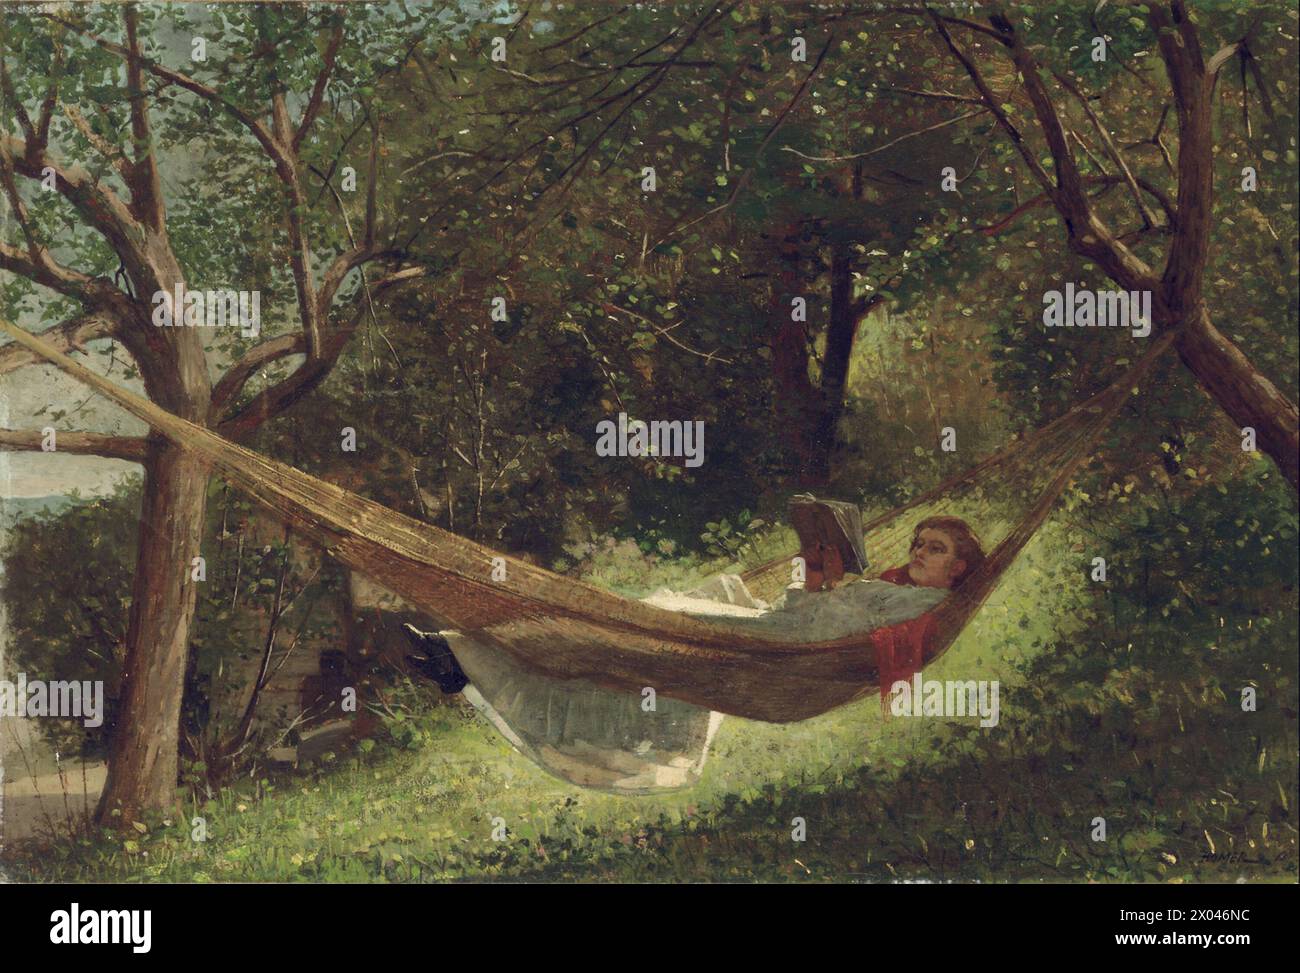 Girl in the Hammock, 1873 (oil on canvas) by Homer, Winslow (1836-1910); 34.3x50.8 cm; Pr Stock Photo